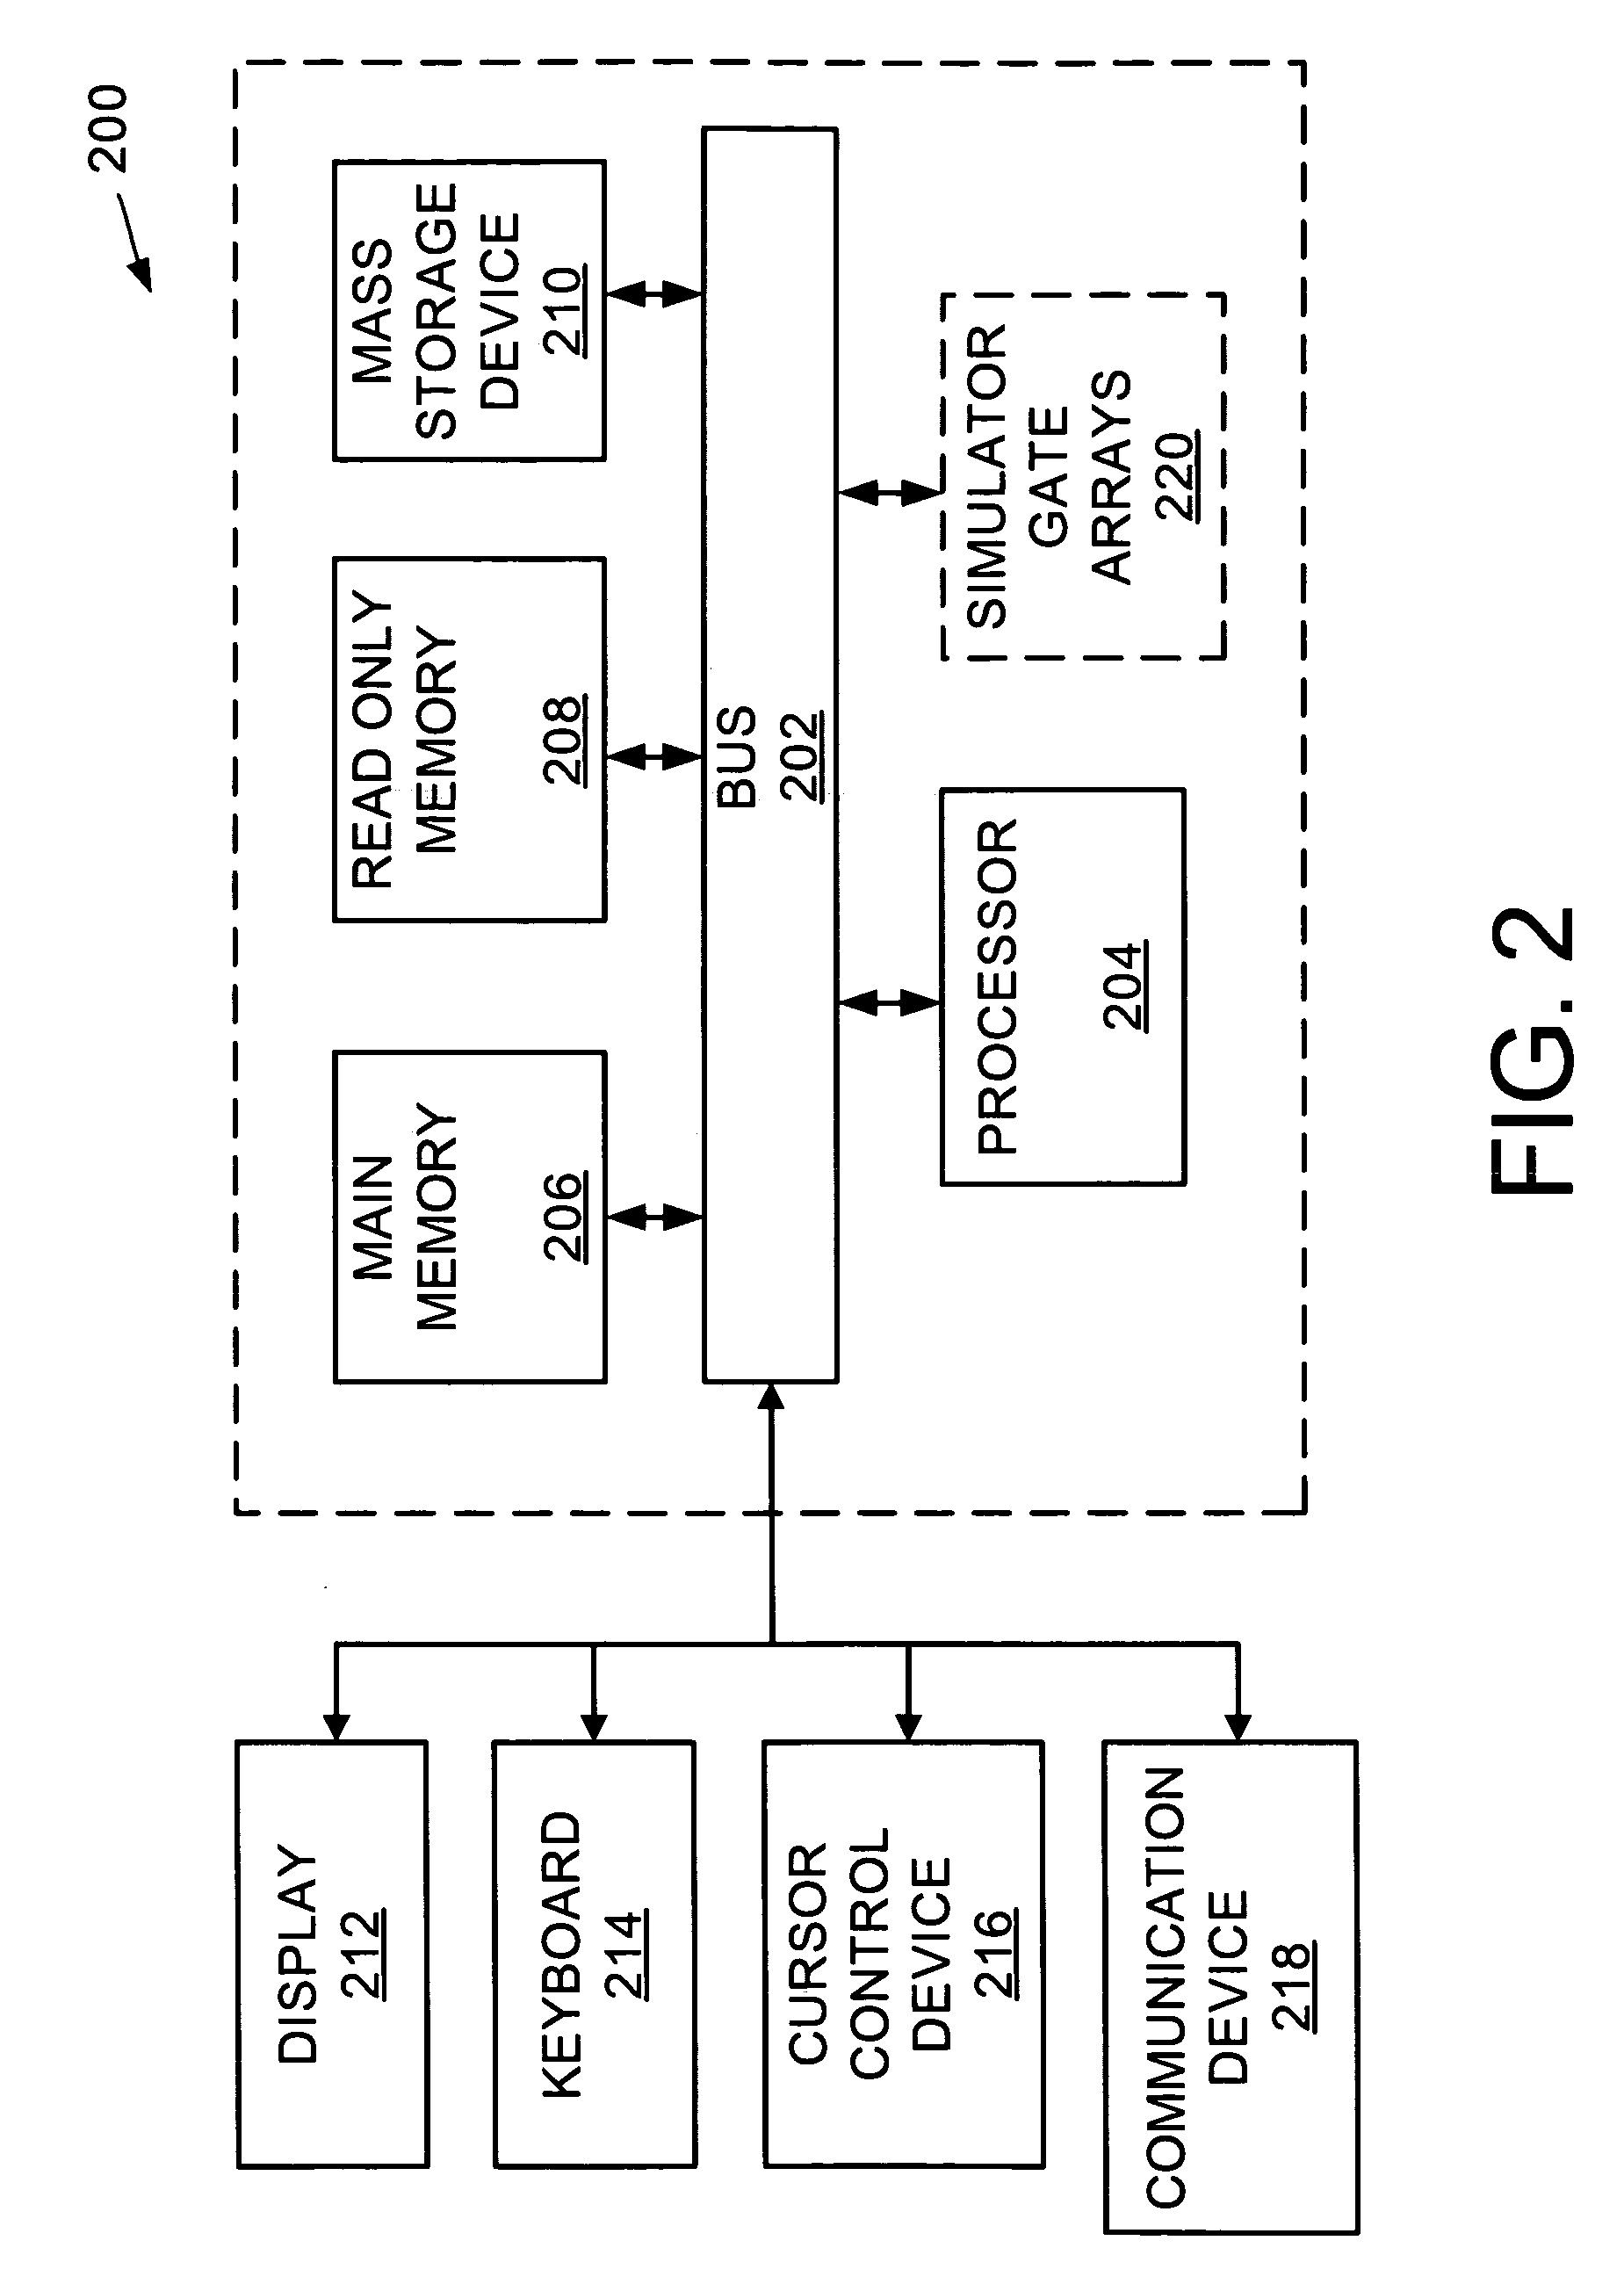 Method and apparatus for creating integrated circuit simulator test source files